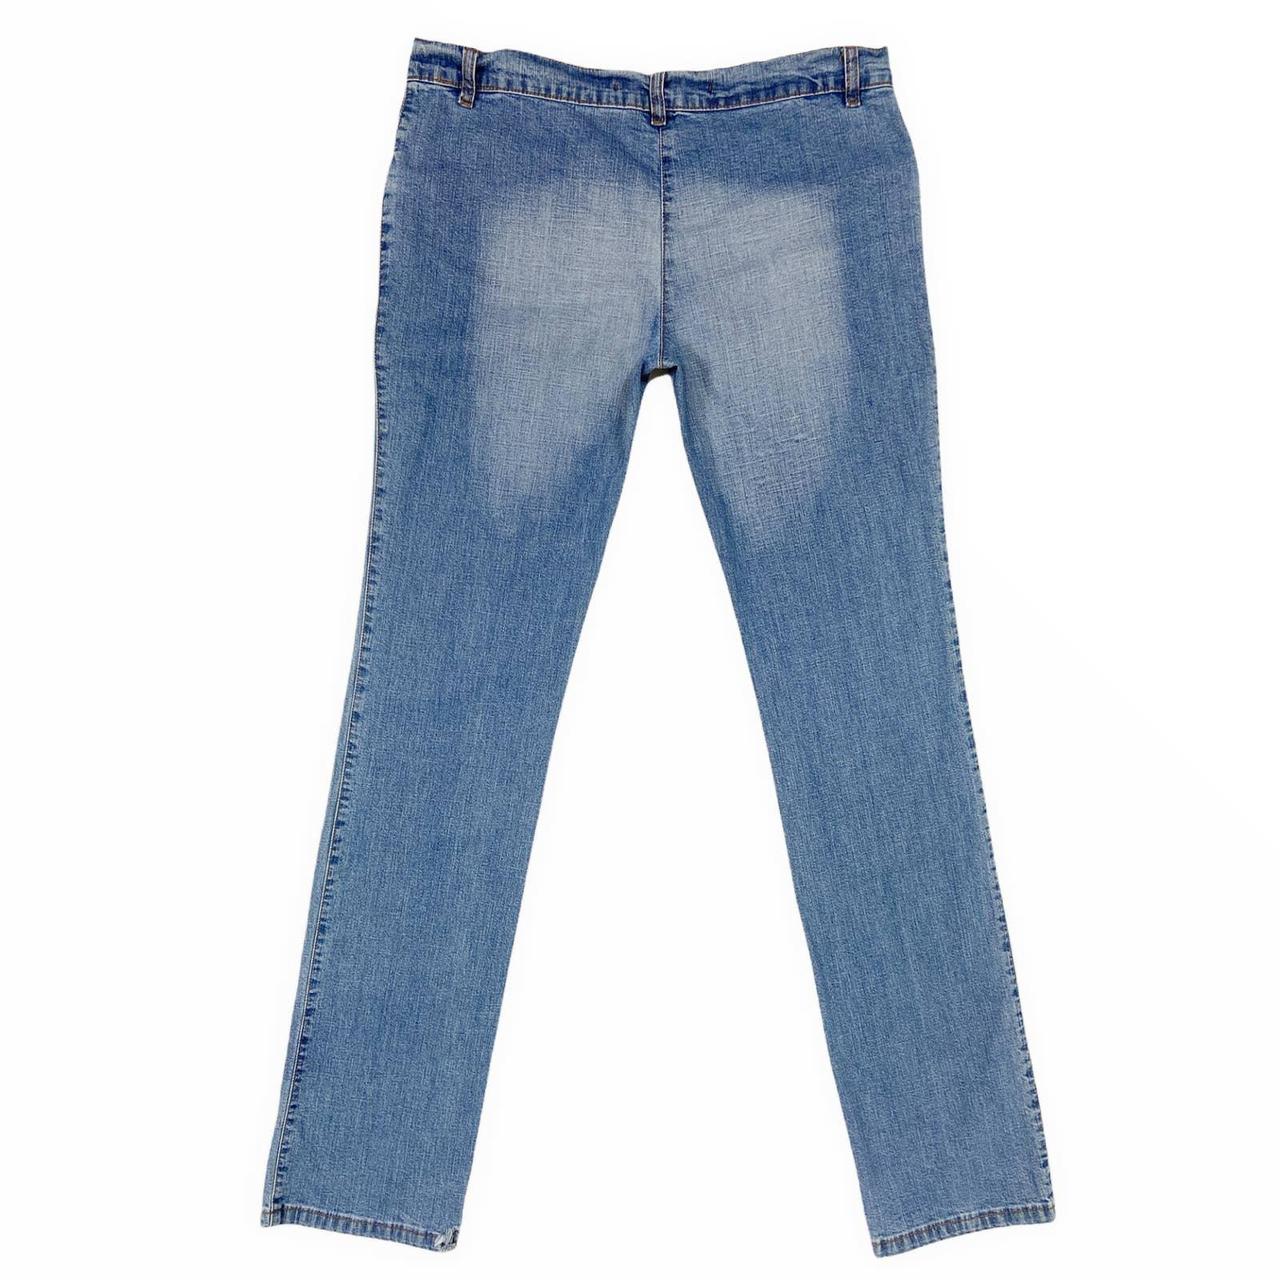 Product Image 2 - Low rise skinny jeans by